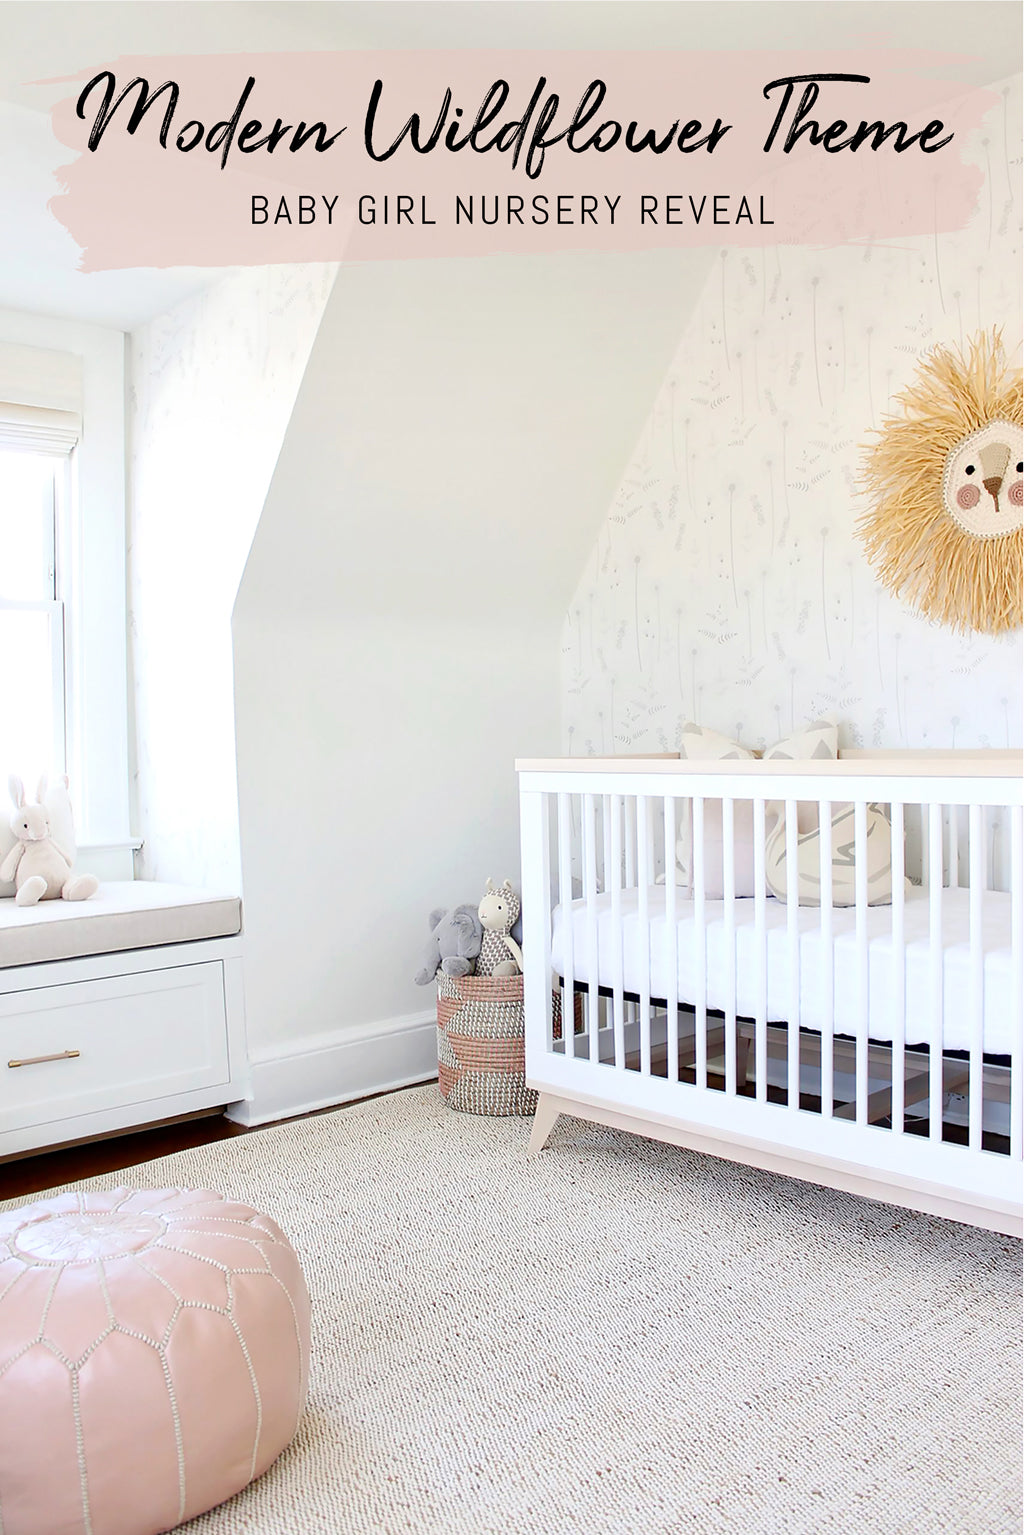 Modern wildflower theme baby girl bedroom interior design in white, blush pink and grey colors